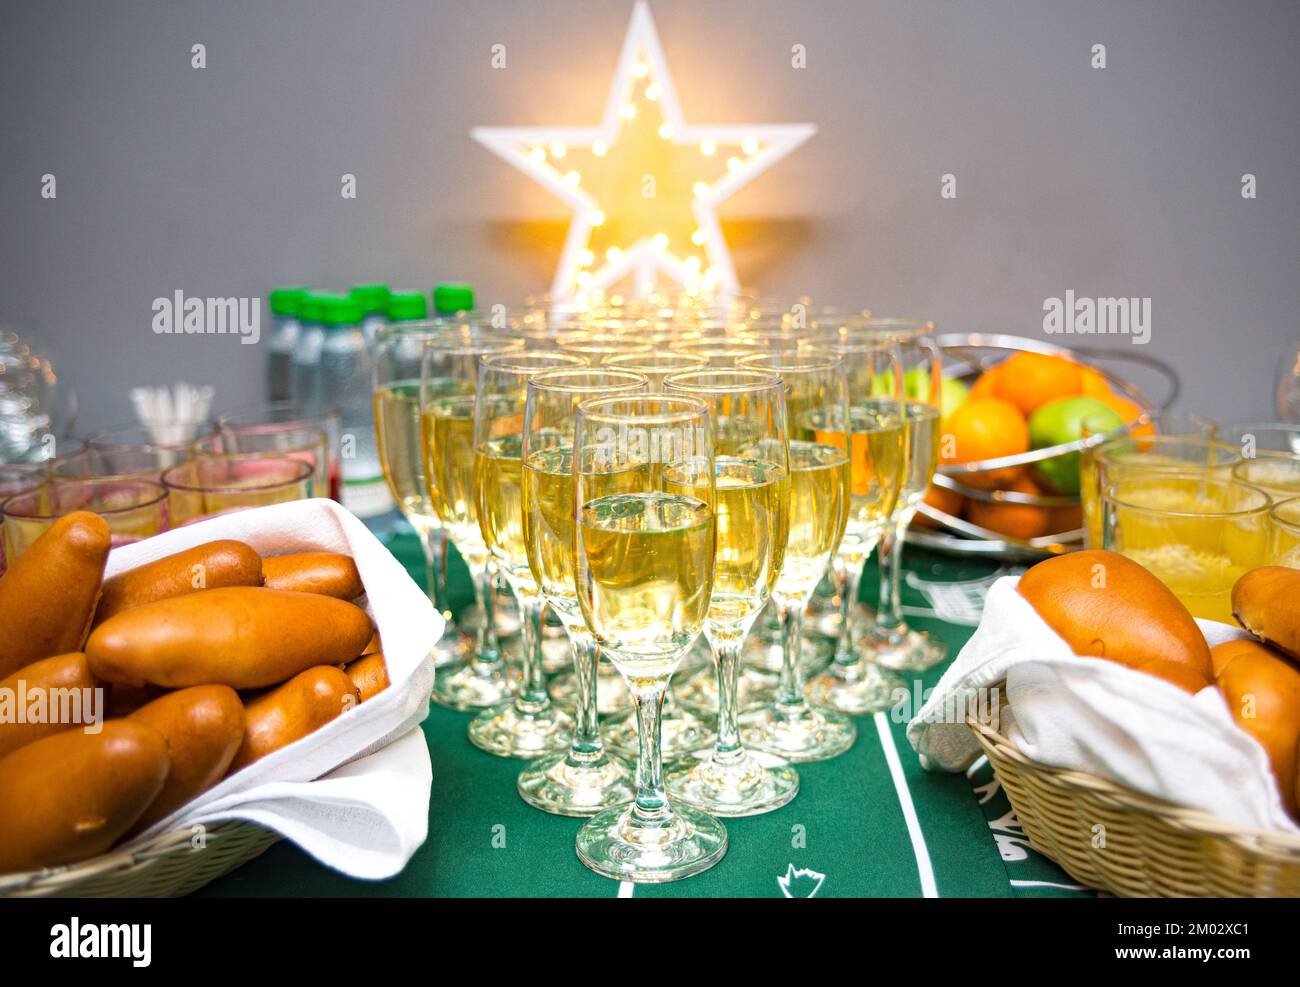 Festive table. Russian pies, soft drinks, juices, fruits and champagne in glasses. Stock Photo